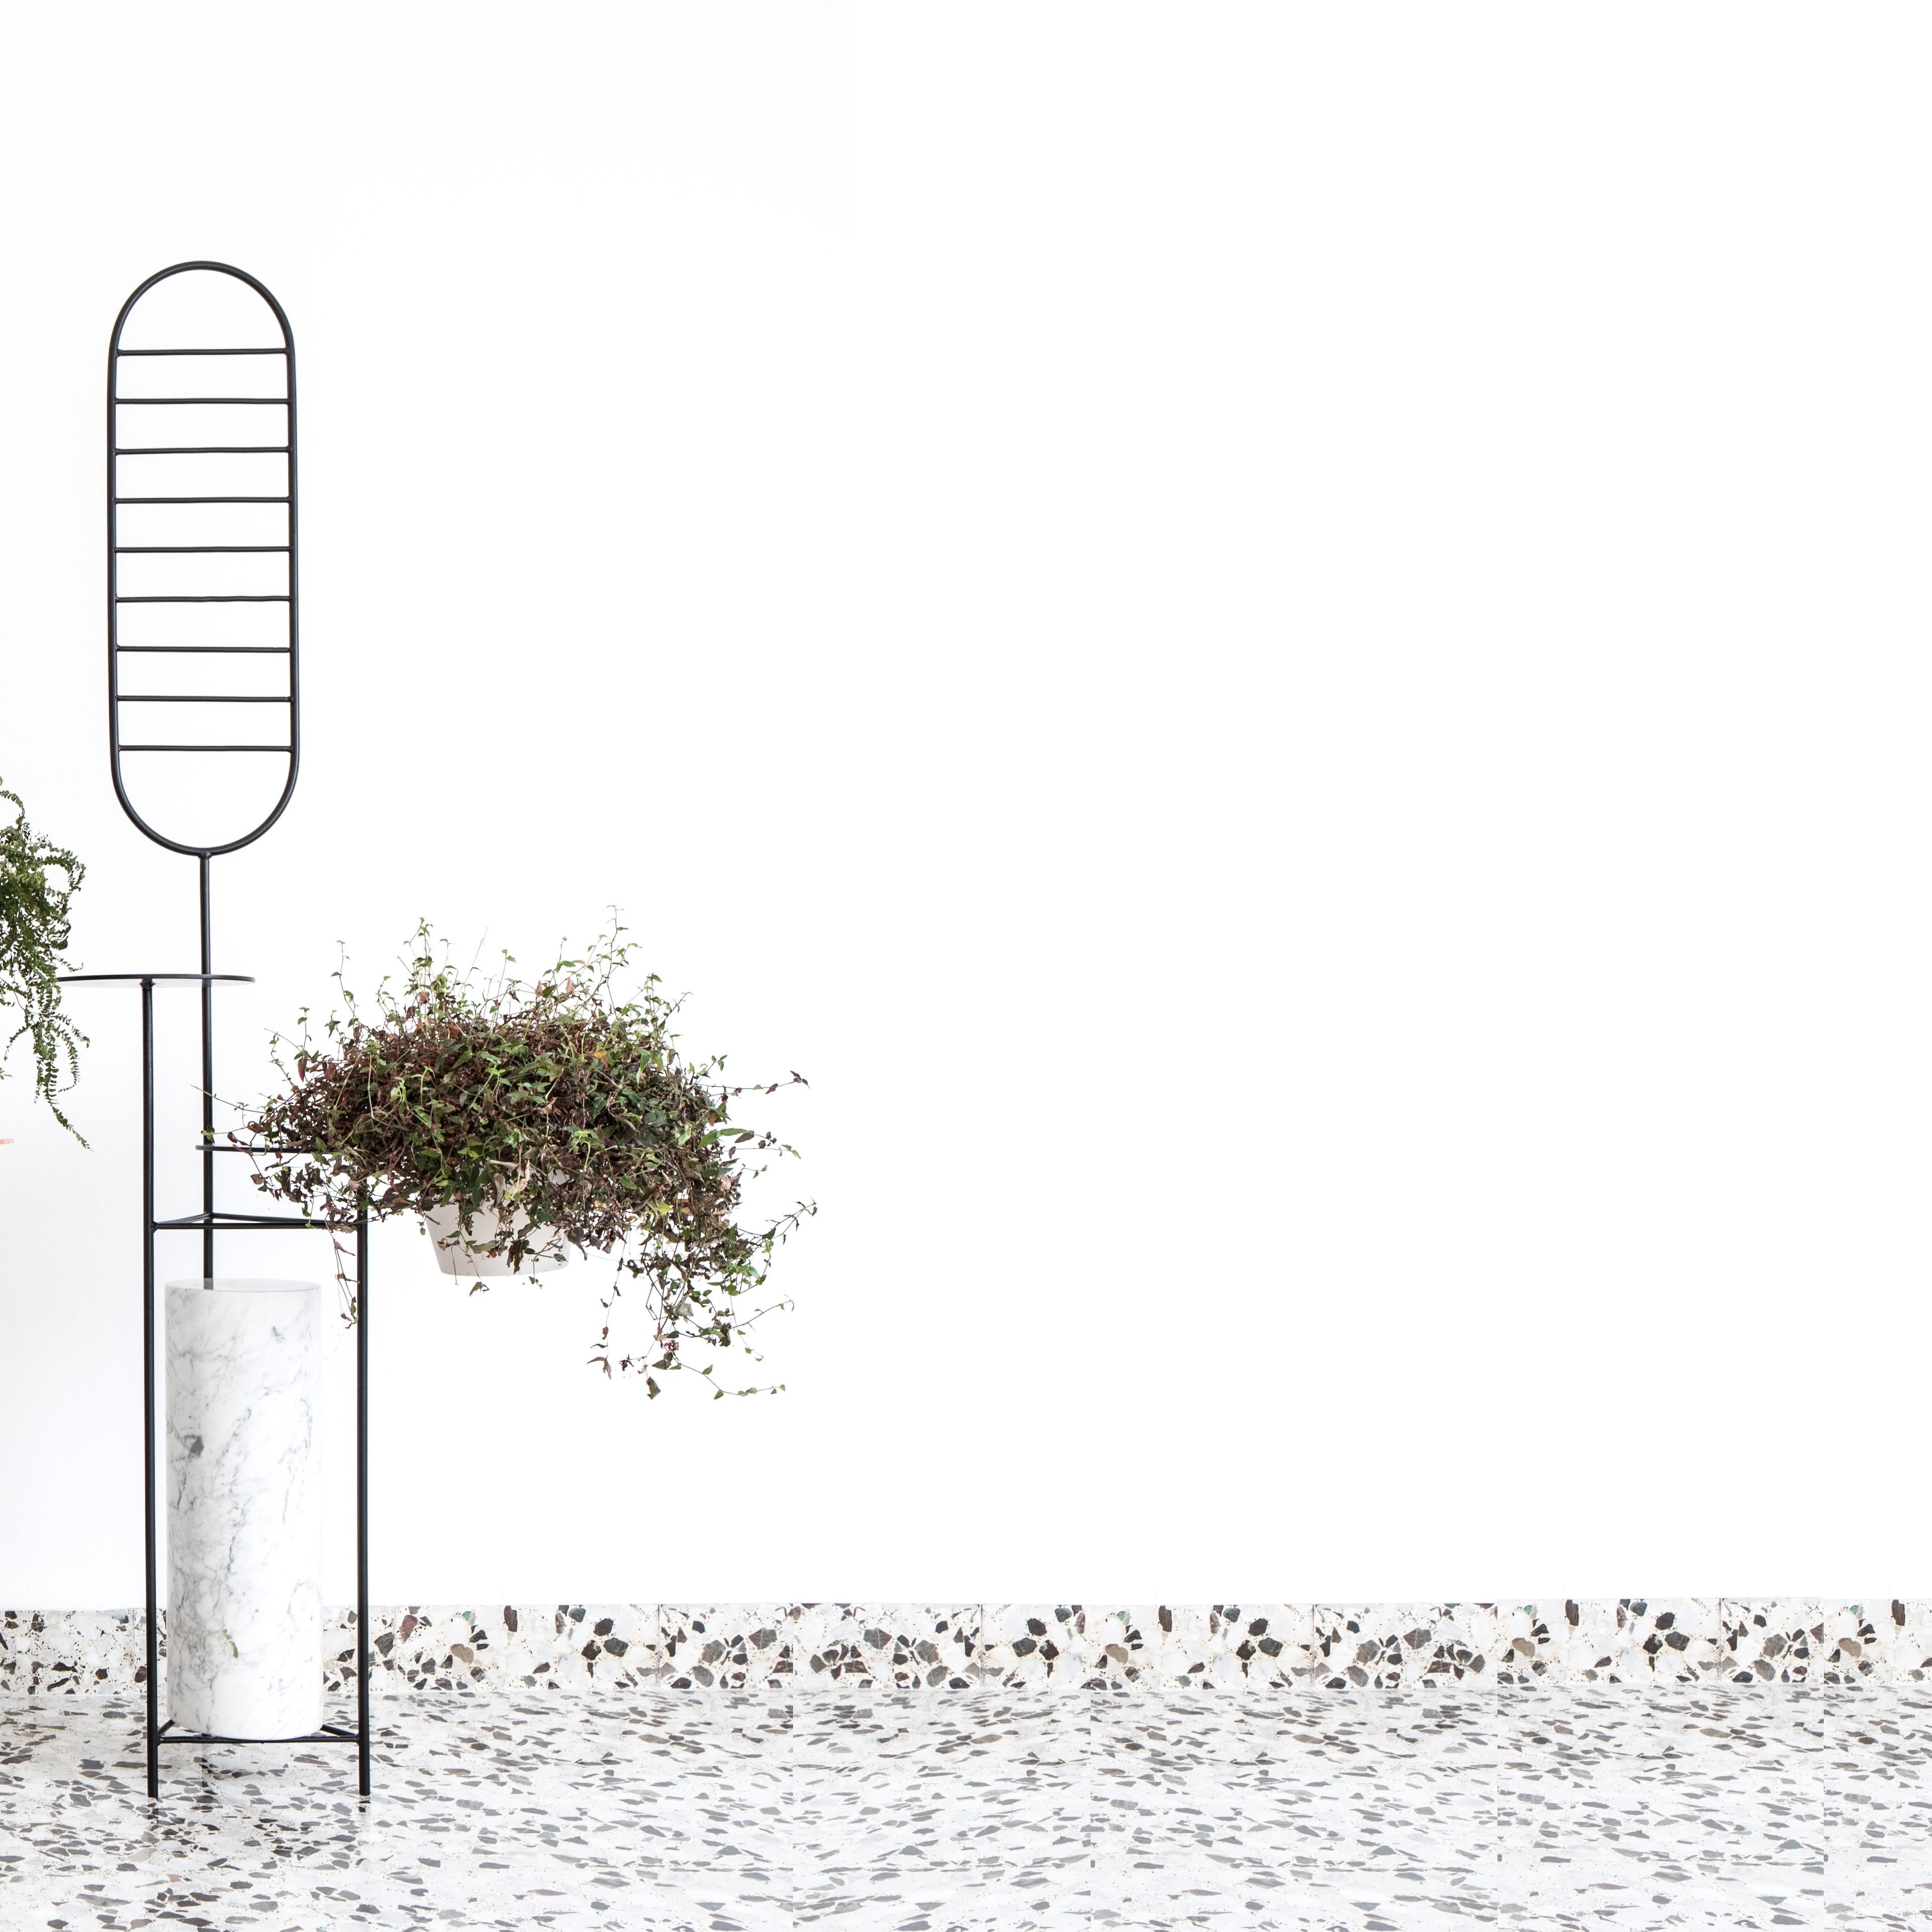 Folli black steel by Borgi Bastormagi
Dimensions: W 75 x D 70 x H 160 cm
Material: Steel, marble

Foll[i] offers a moment of one to one relation with nature. A minimal steel structure presents multiple possibilities for a personal garden at